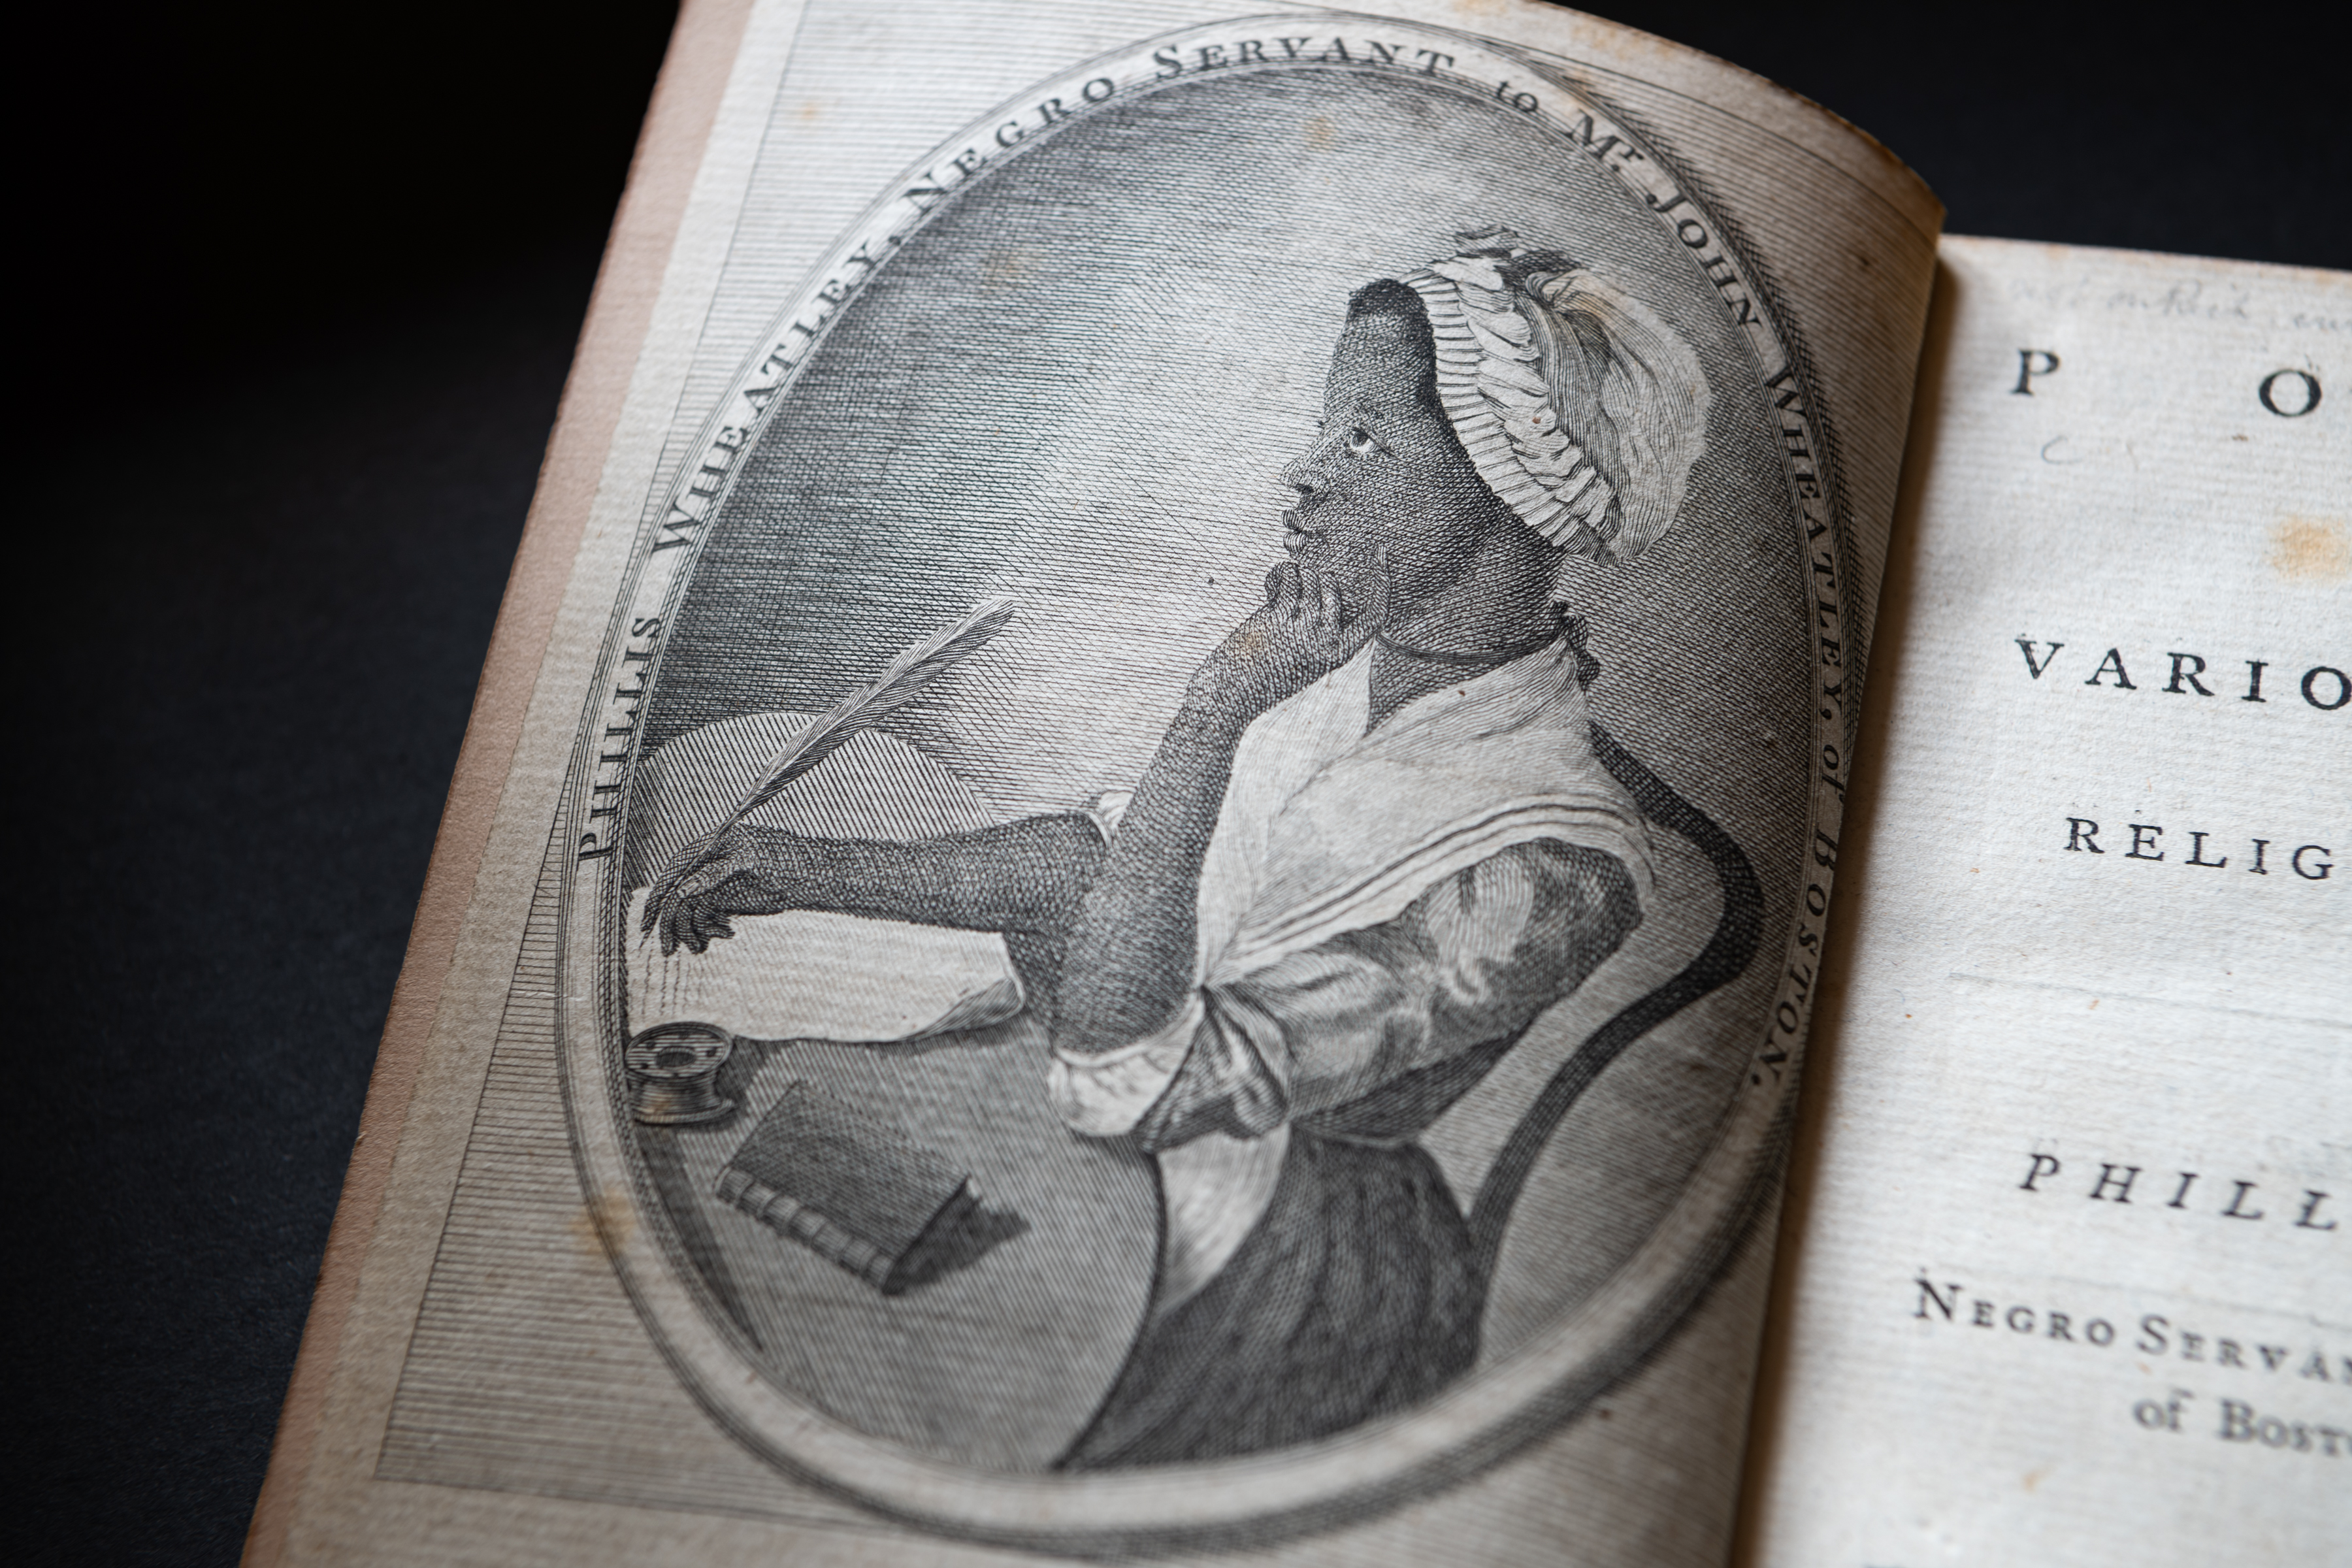 Detail of a printed book shows a portrait frontispiece of Phillis Wheatley sitting at a table with a quill in her hand in the process of writing.